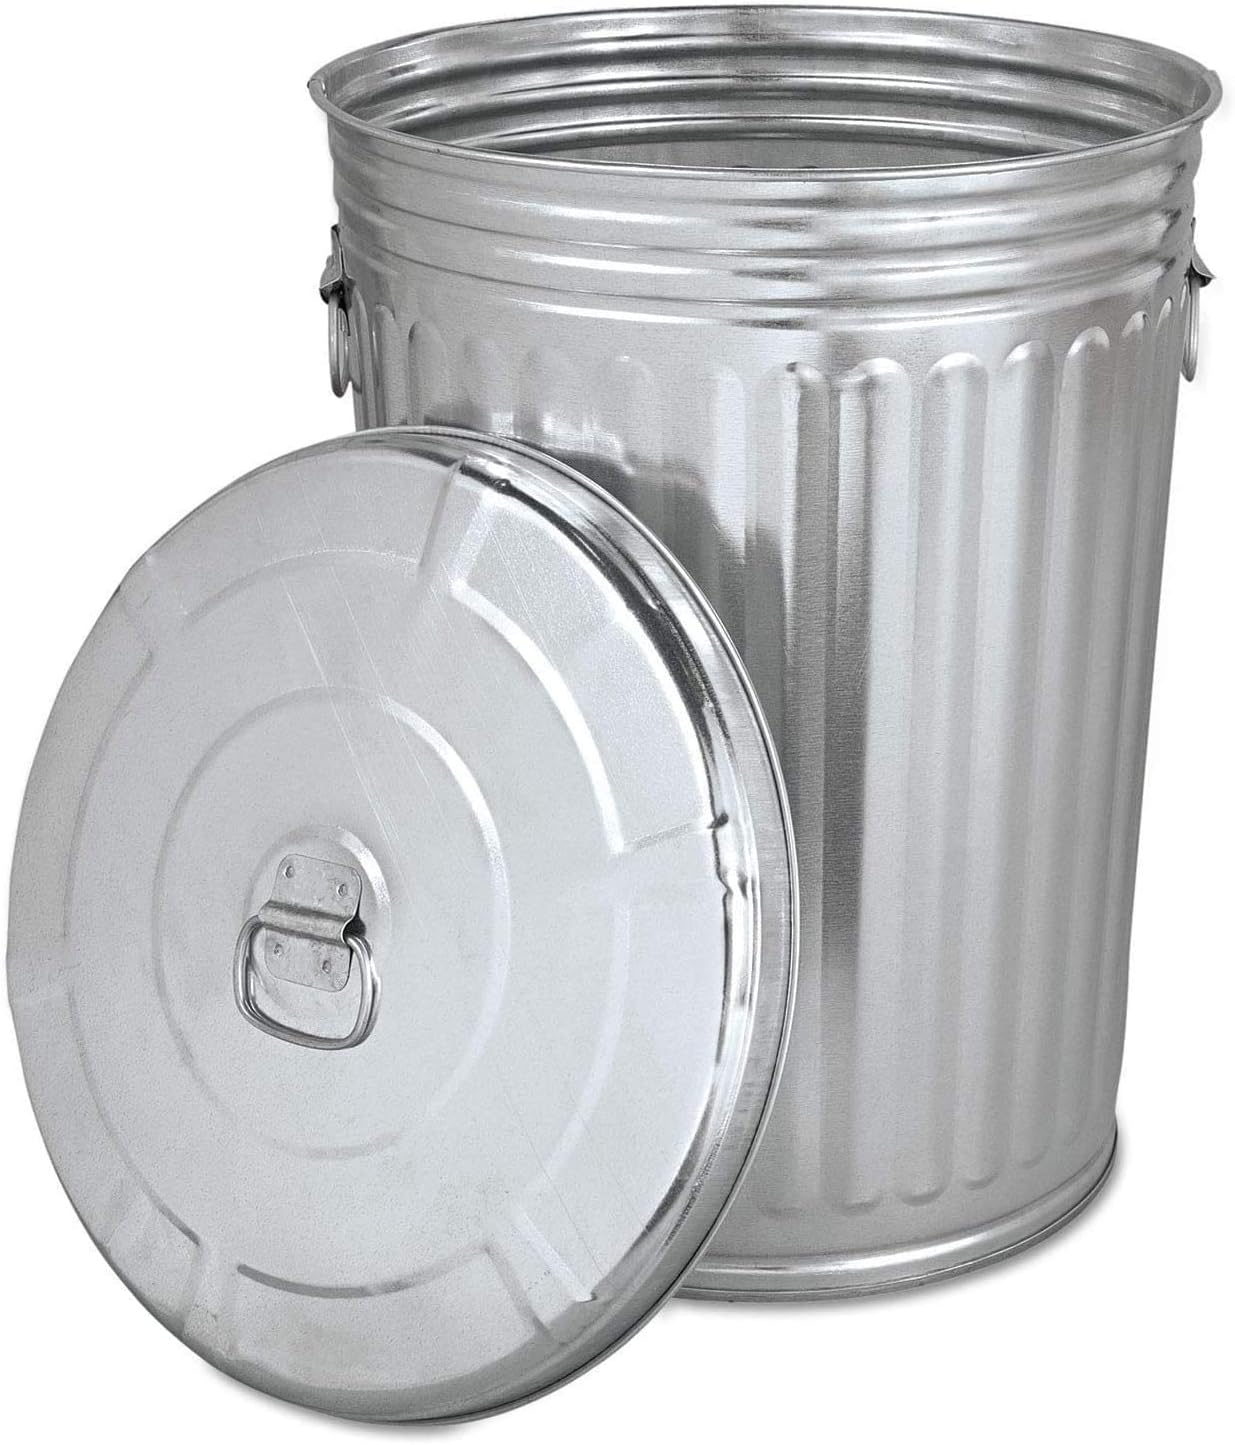 https://bigbigmart.com/wp-content/uploads/2023/11/KCHEX-Trash-can-with-lid-Pre-Galvanized-Trash-Can-with-Lid-Round-Steel-20gal-Gray-Sold-as-1-Each-Metal-Trash-can-Outdoor-Garbage-can-with-lid-Galvanized-Trash-can-with-lid.jpg